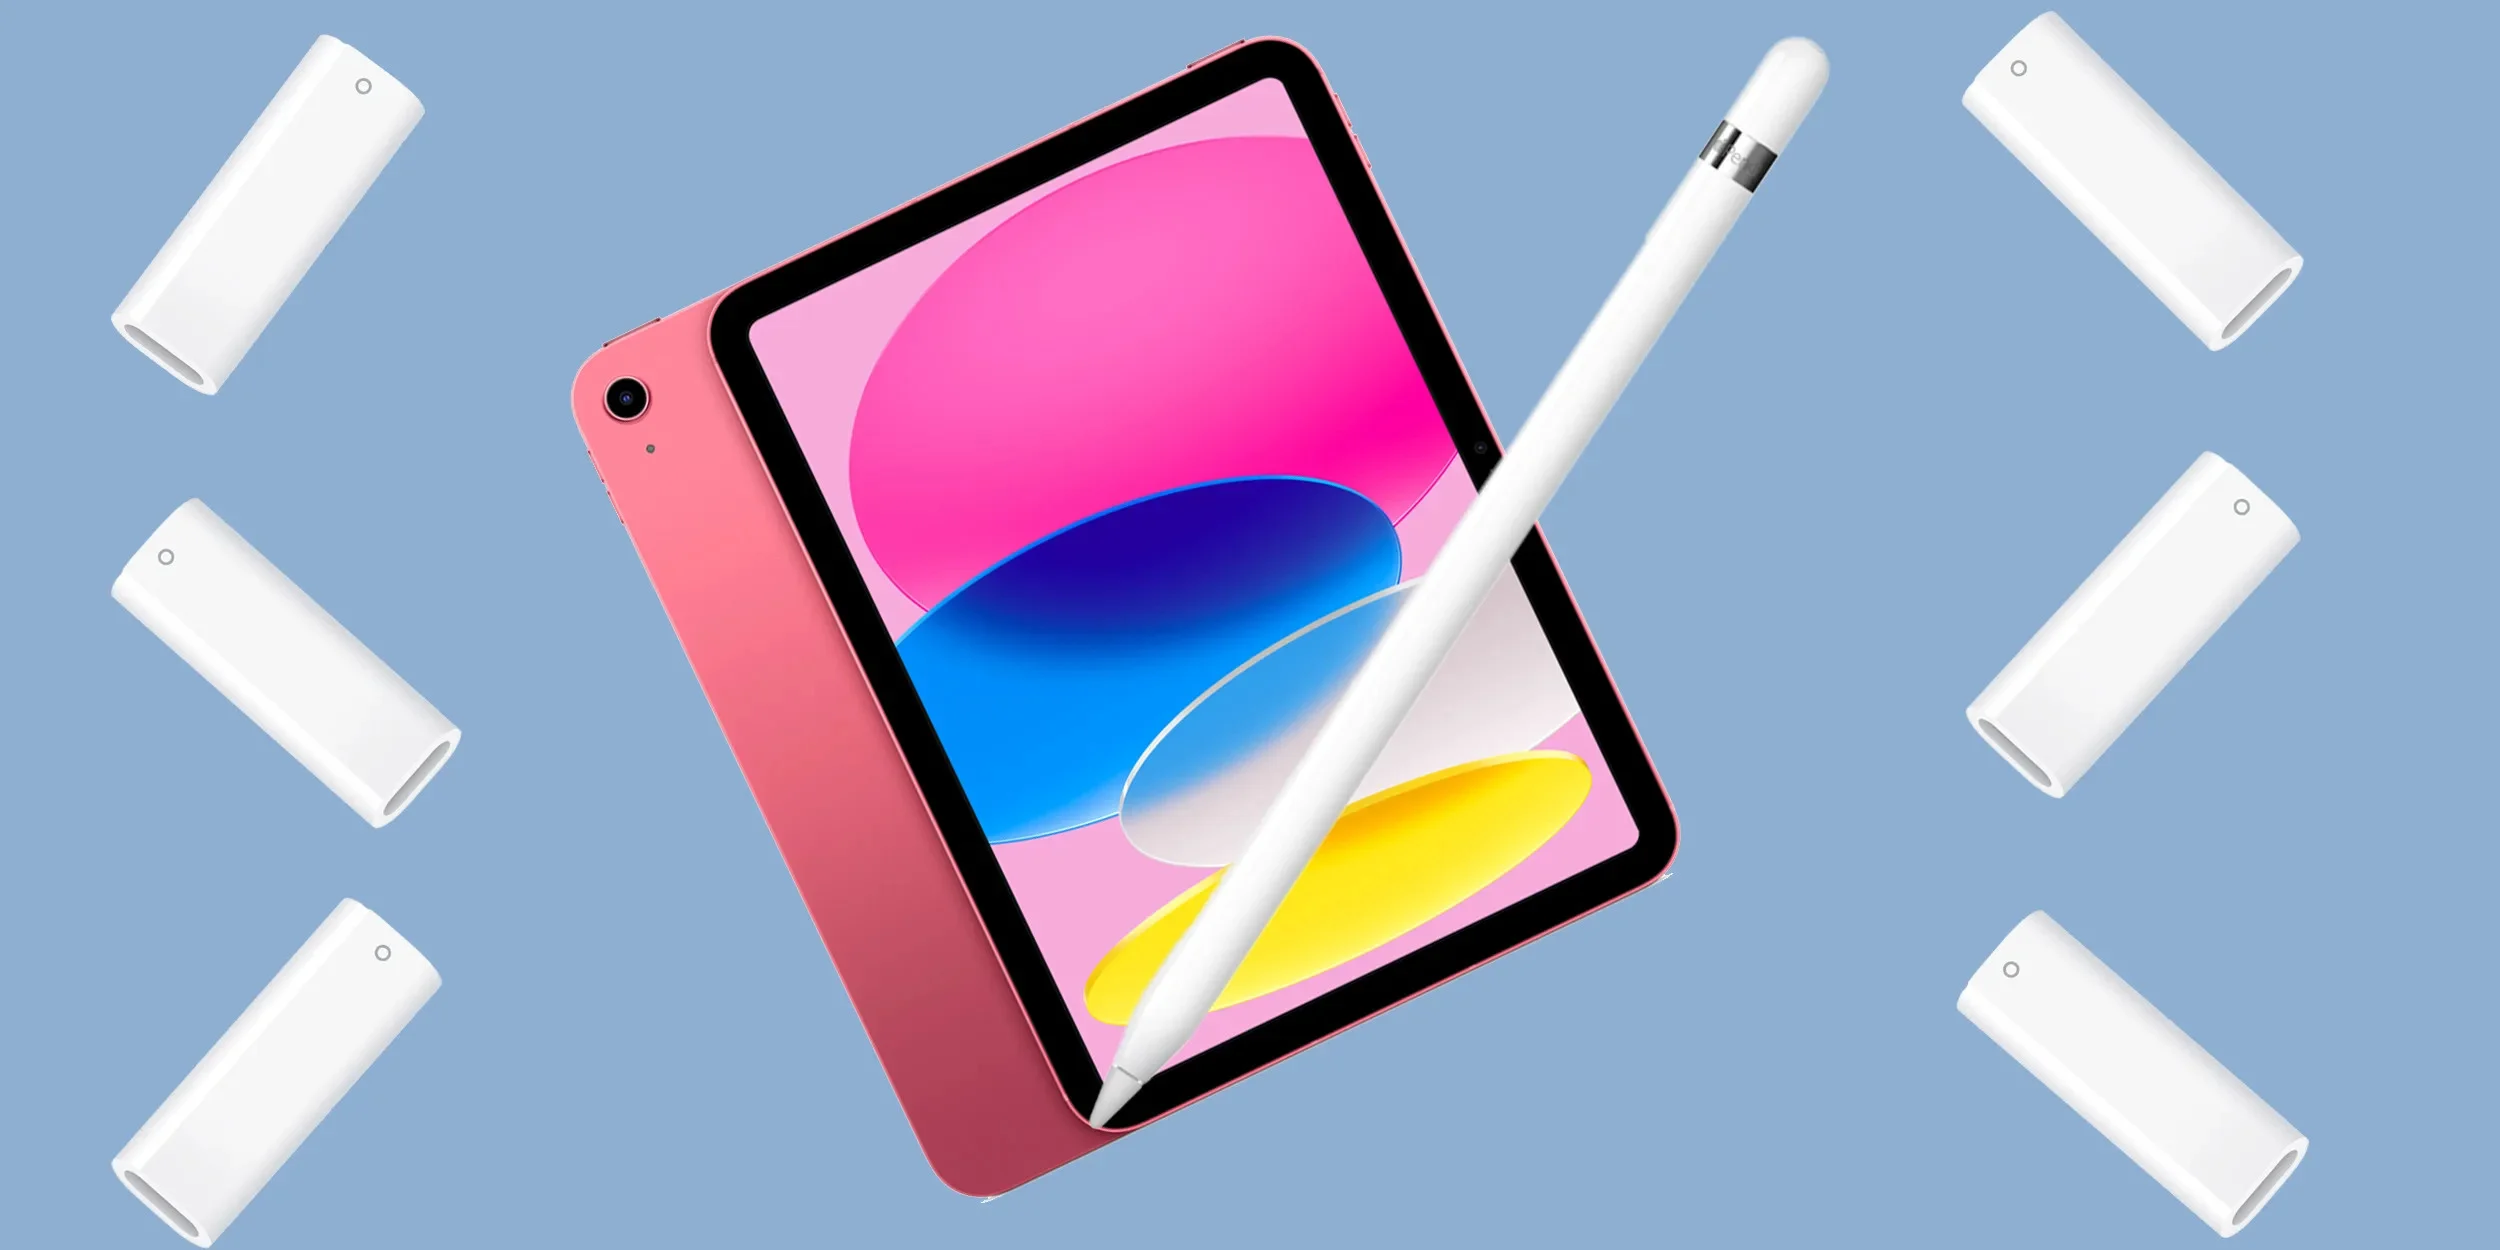 Apple’s New Ipad Only Supports the Old Apple Pencil — and Needs an Adapter to Do So